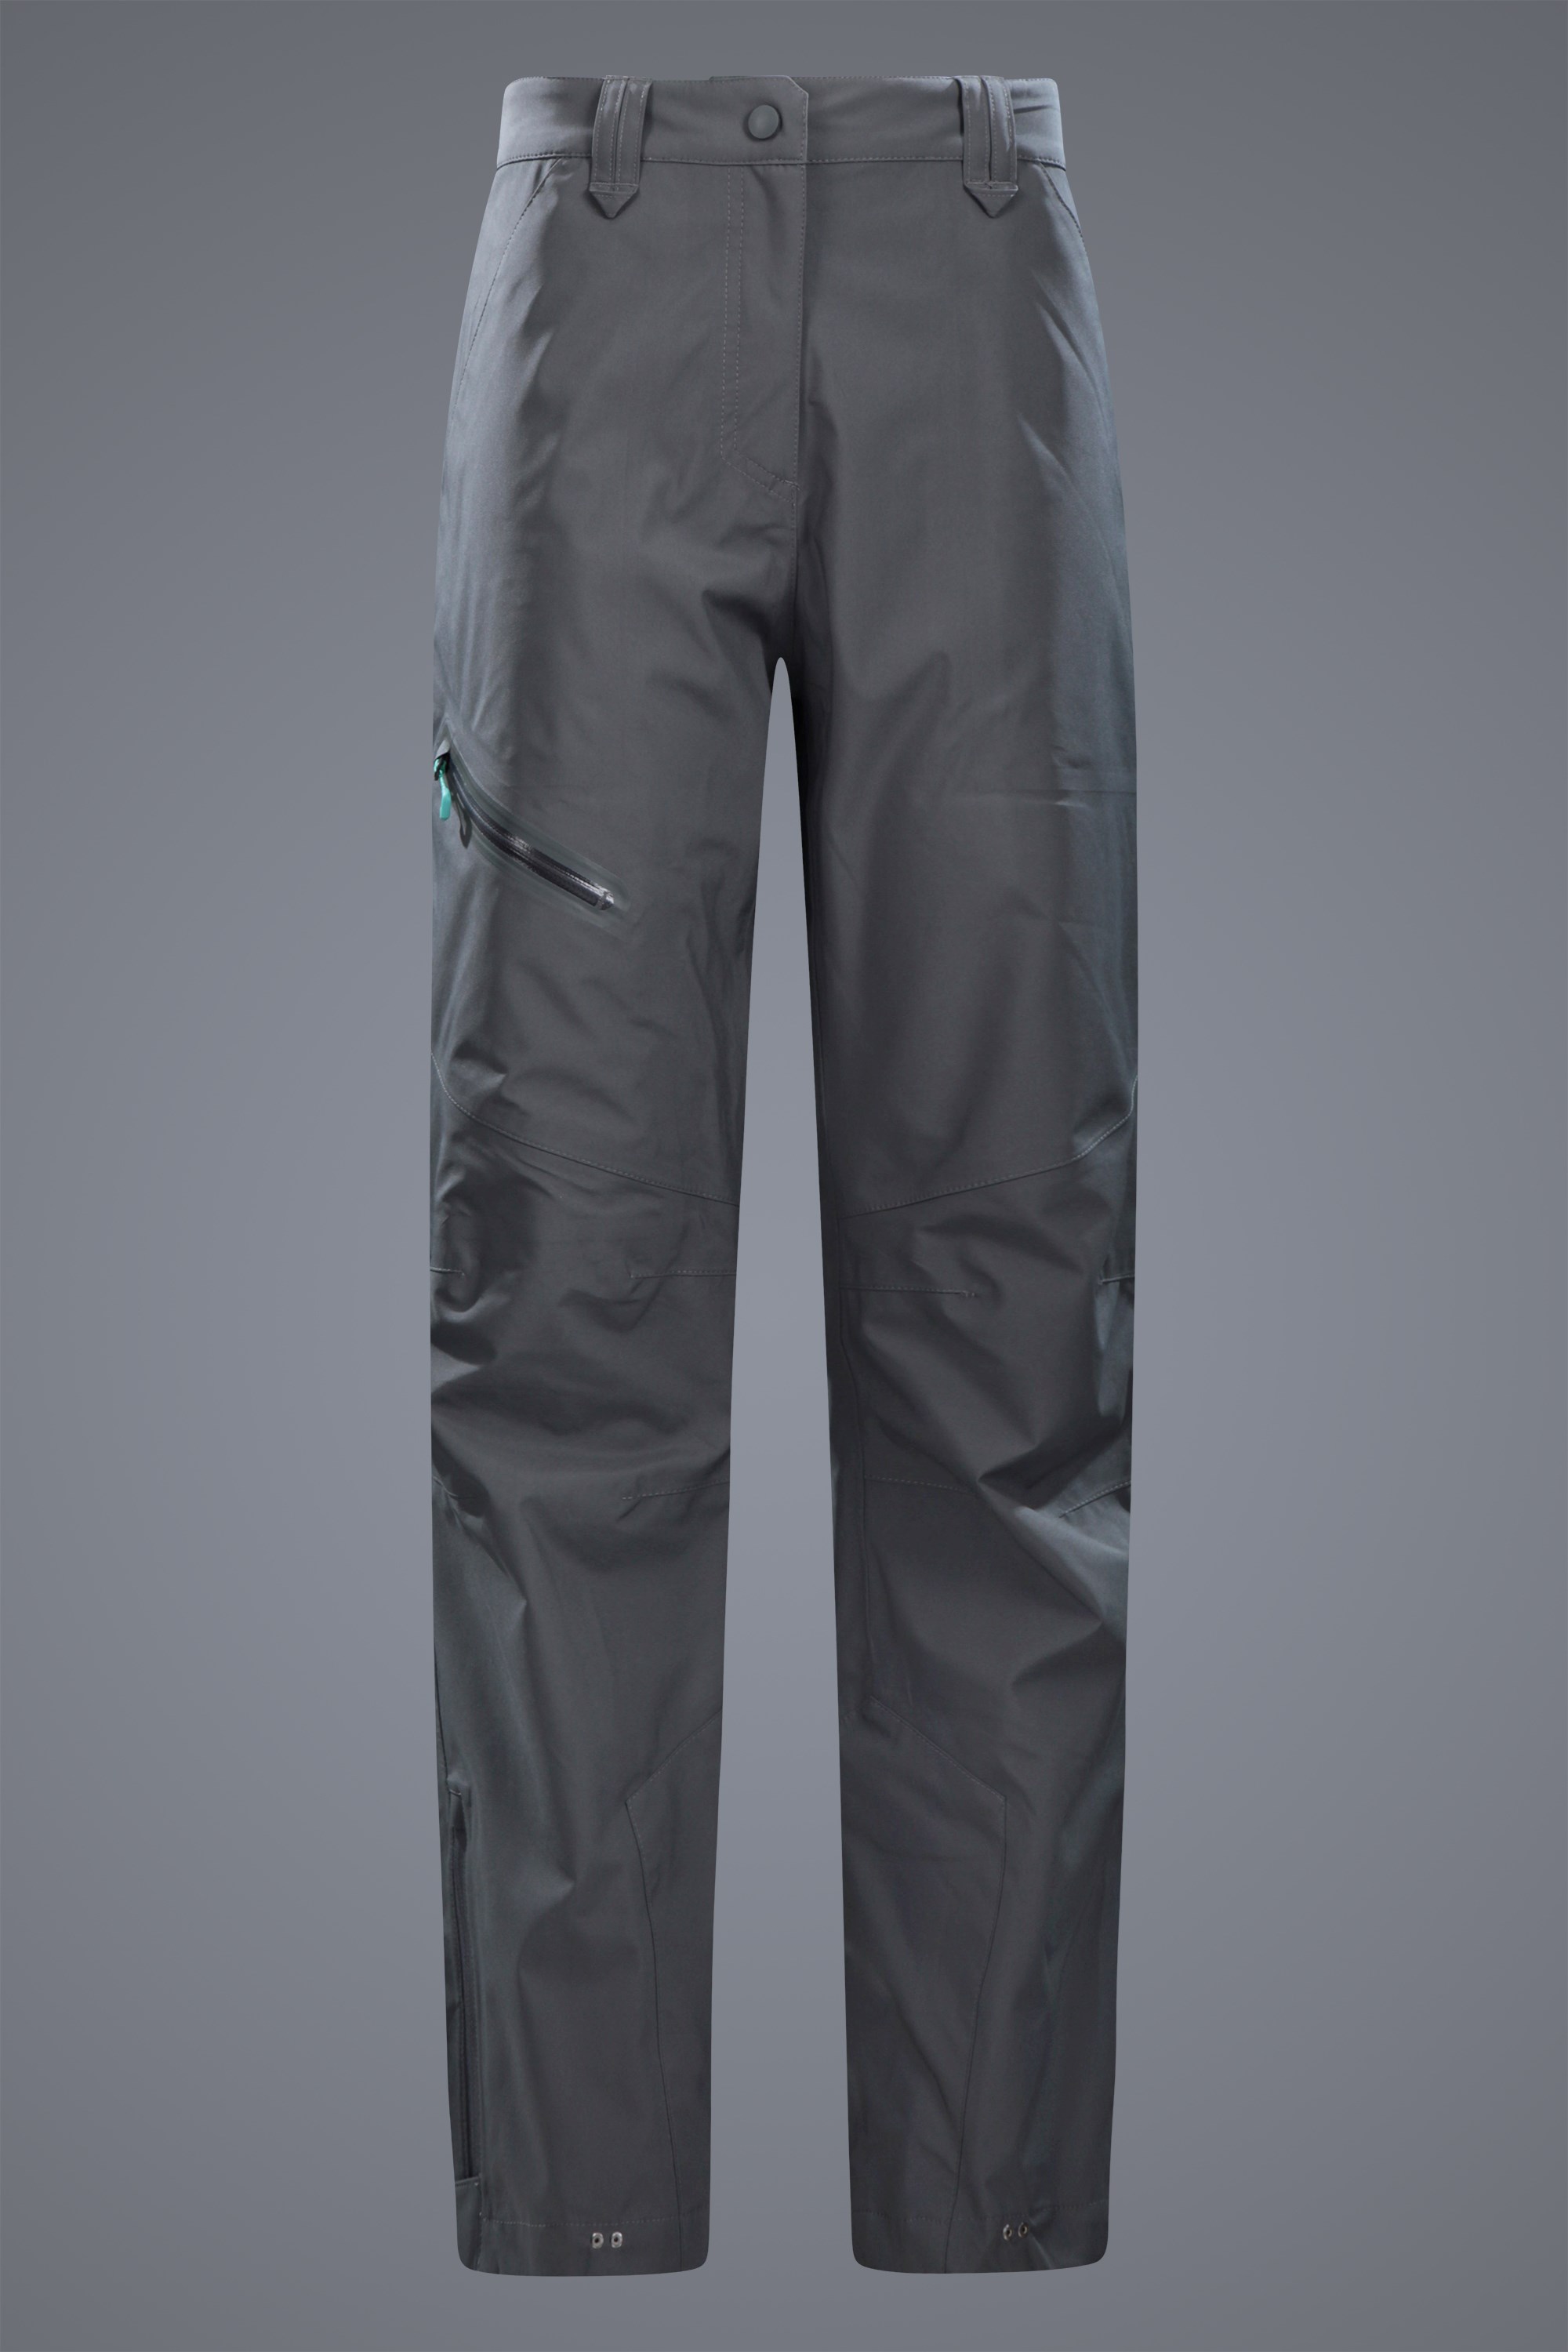 The Top 5 Best Waterproof Trousers for Autumn | Millets